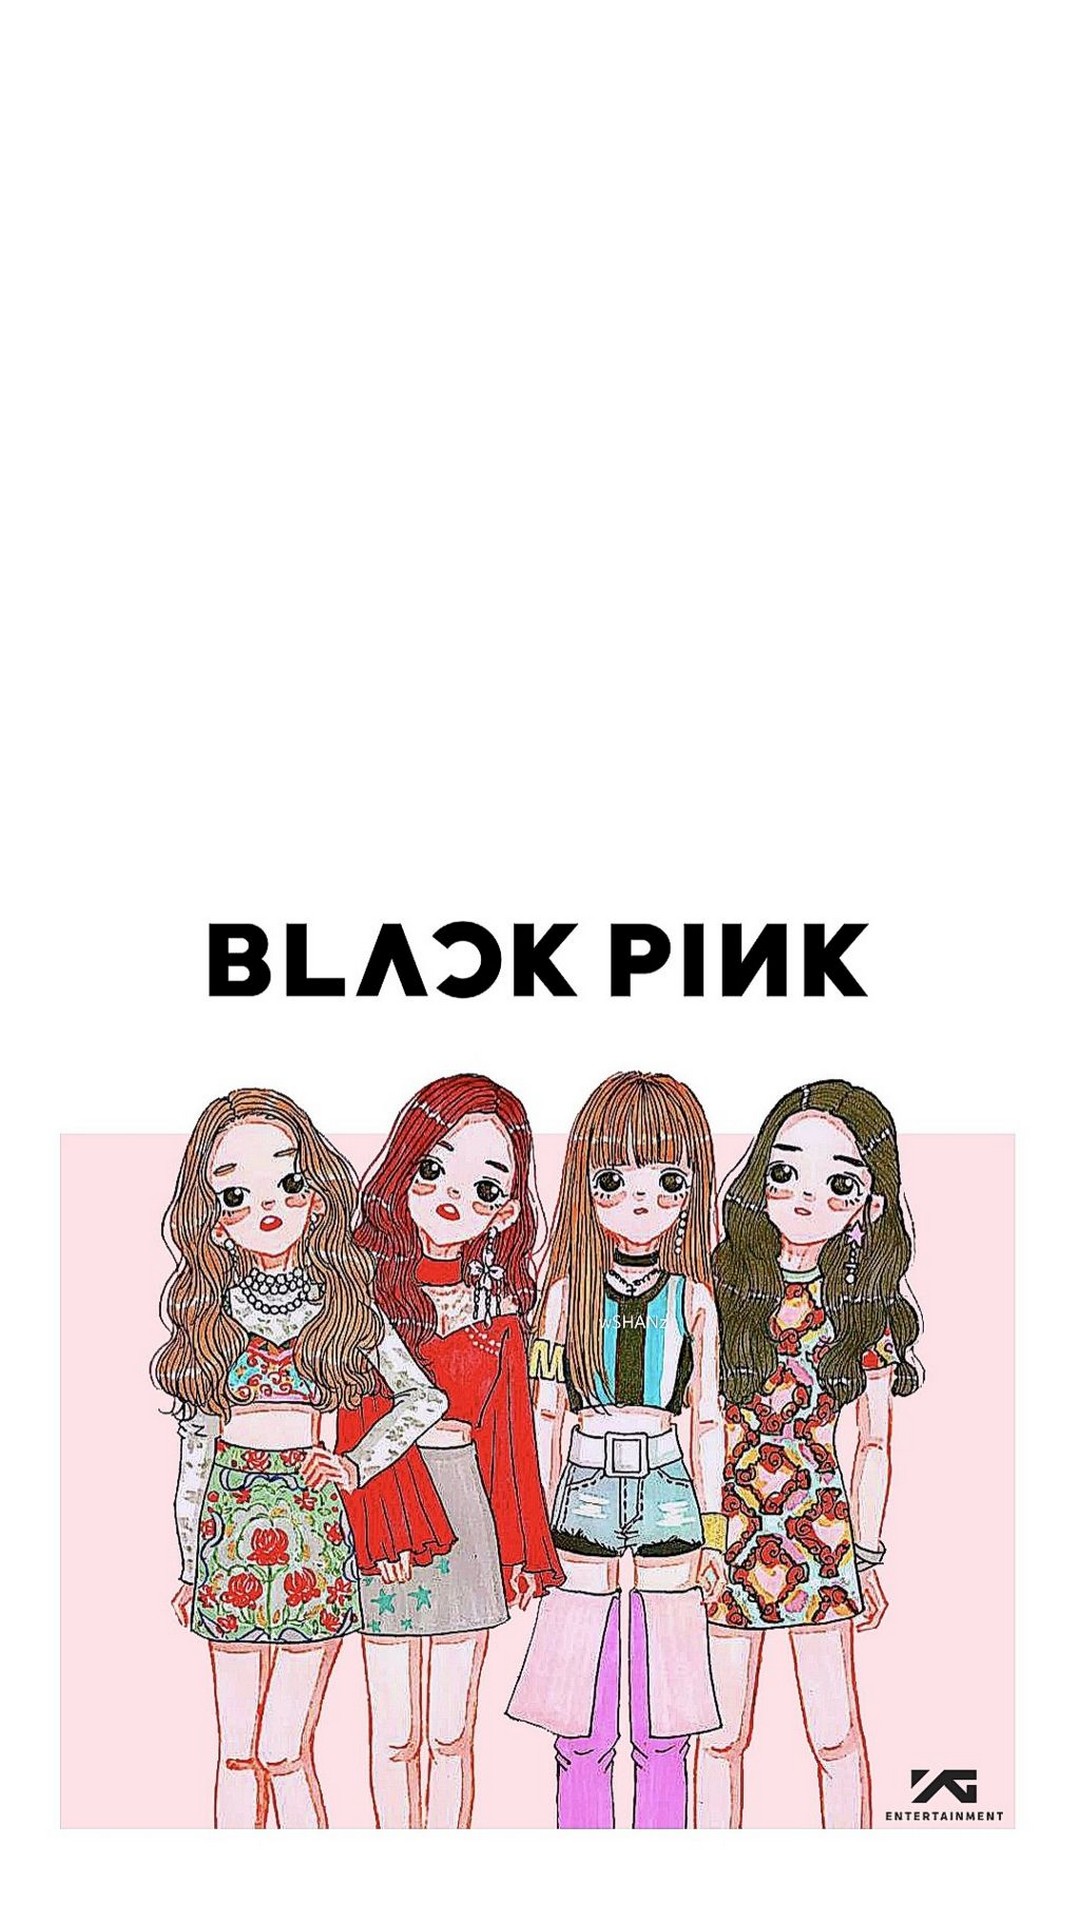 Blackpink Phone Wallpaper with high-resolution 1080x1920 pixel. Download all Mobile Wallpapers and Use them as wallpapers for your iPhone, Tablet, iPad, Android and other mobile devices